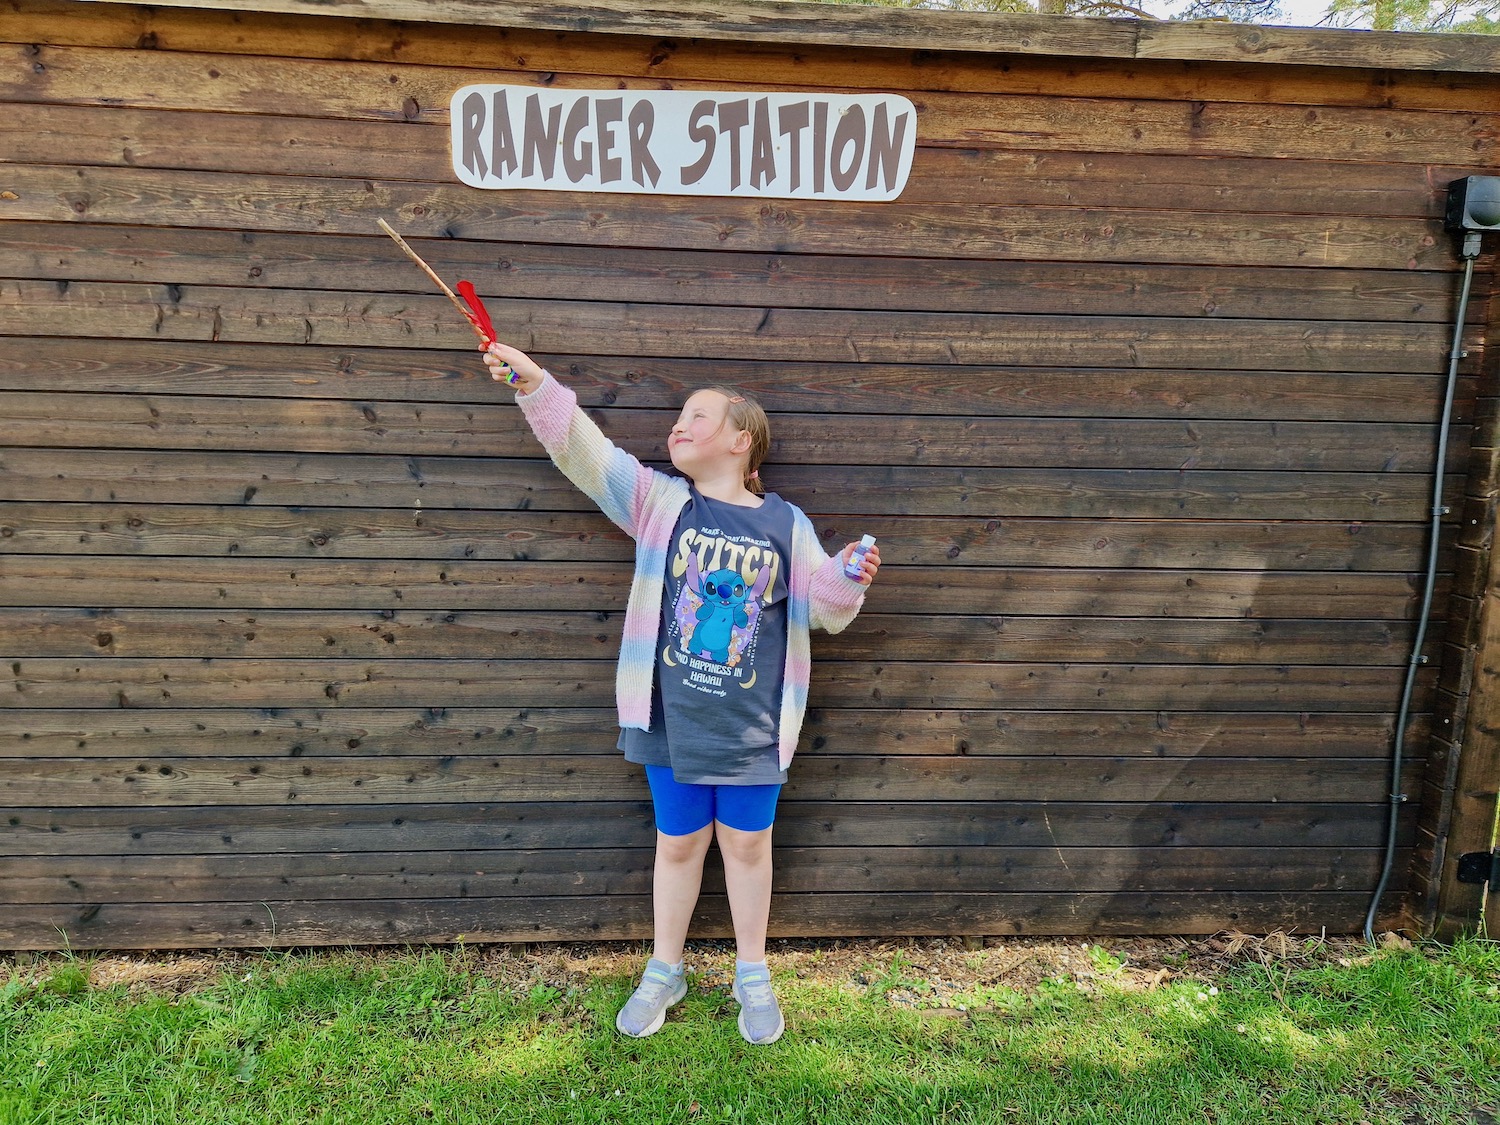 An 8 year old girl wearing a bright cardigan, blue shorts and a Lilo and Stitch t-shirt, holding up a magic wand made from a stick, with a potion bottle in the other hand